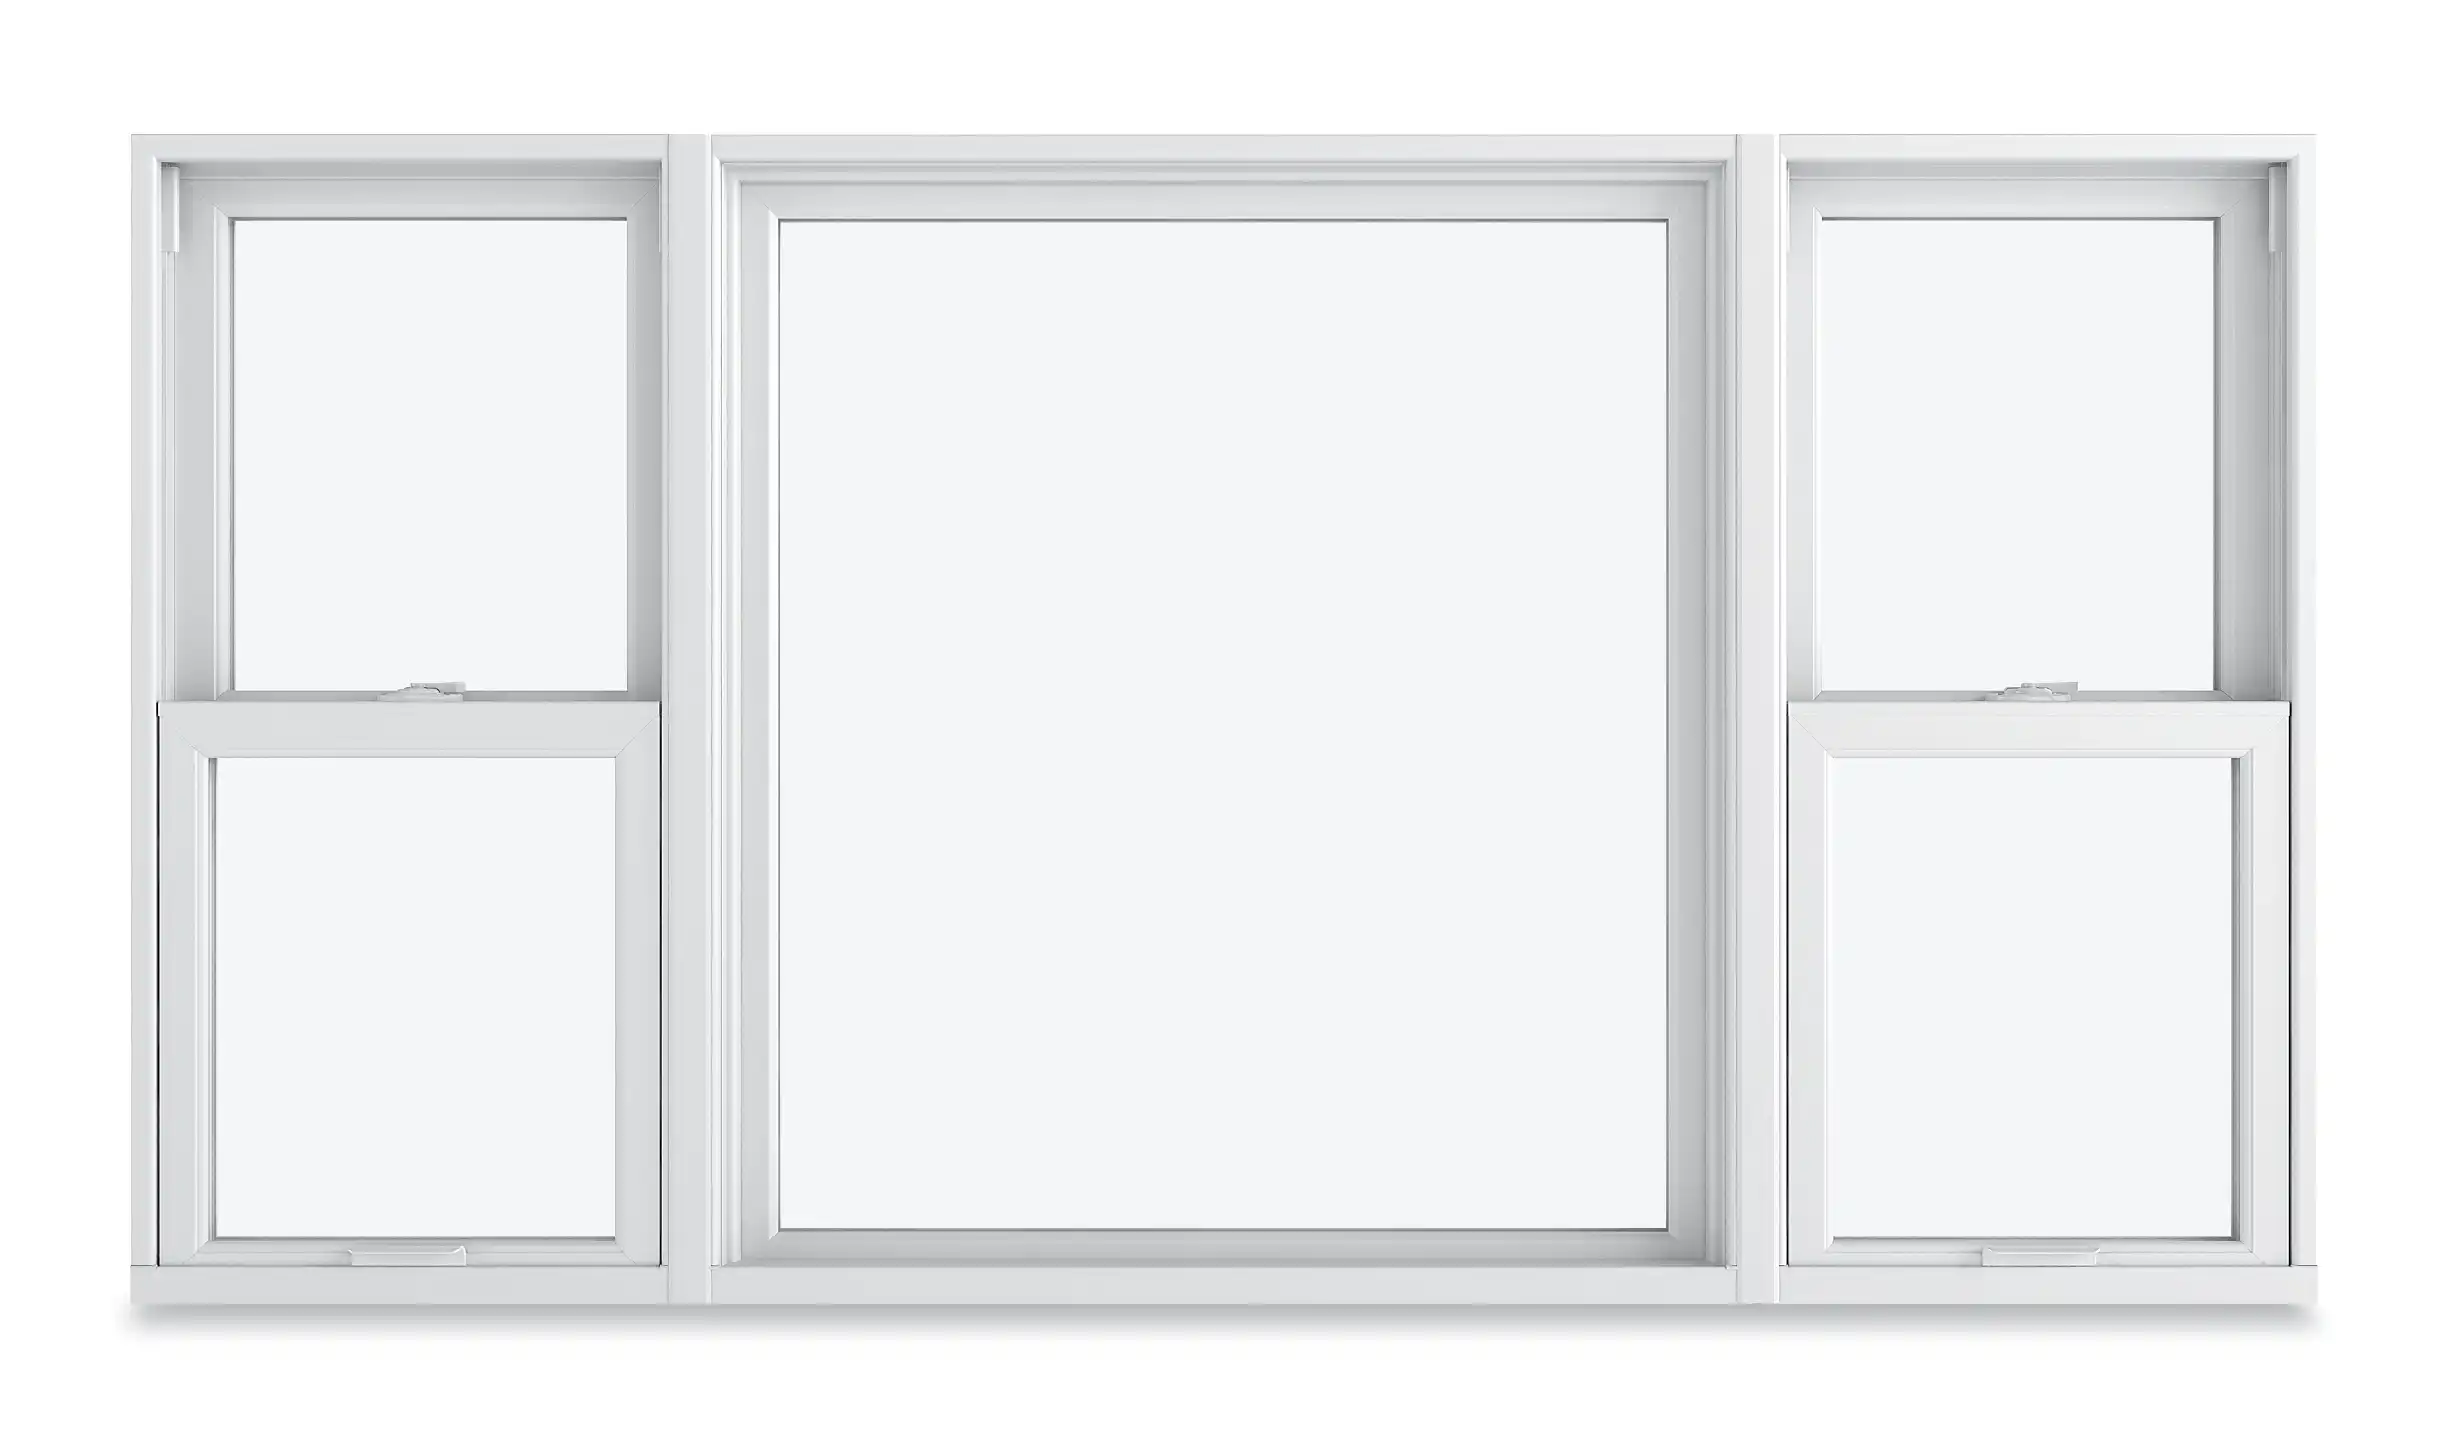 Image of two white Marvin Replacement Double Hung windows with a picture window in the middle.